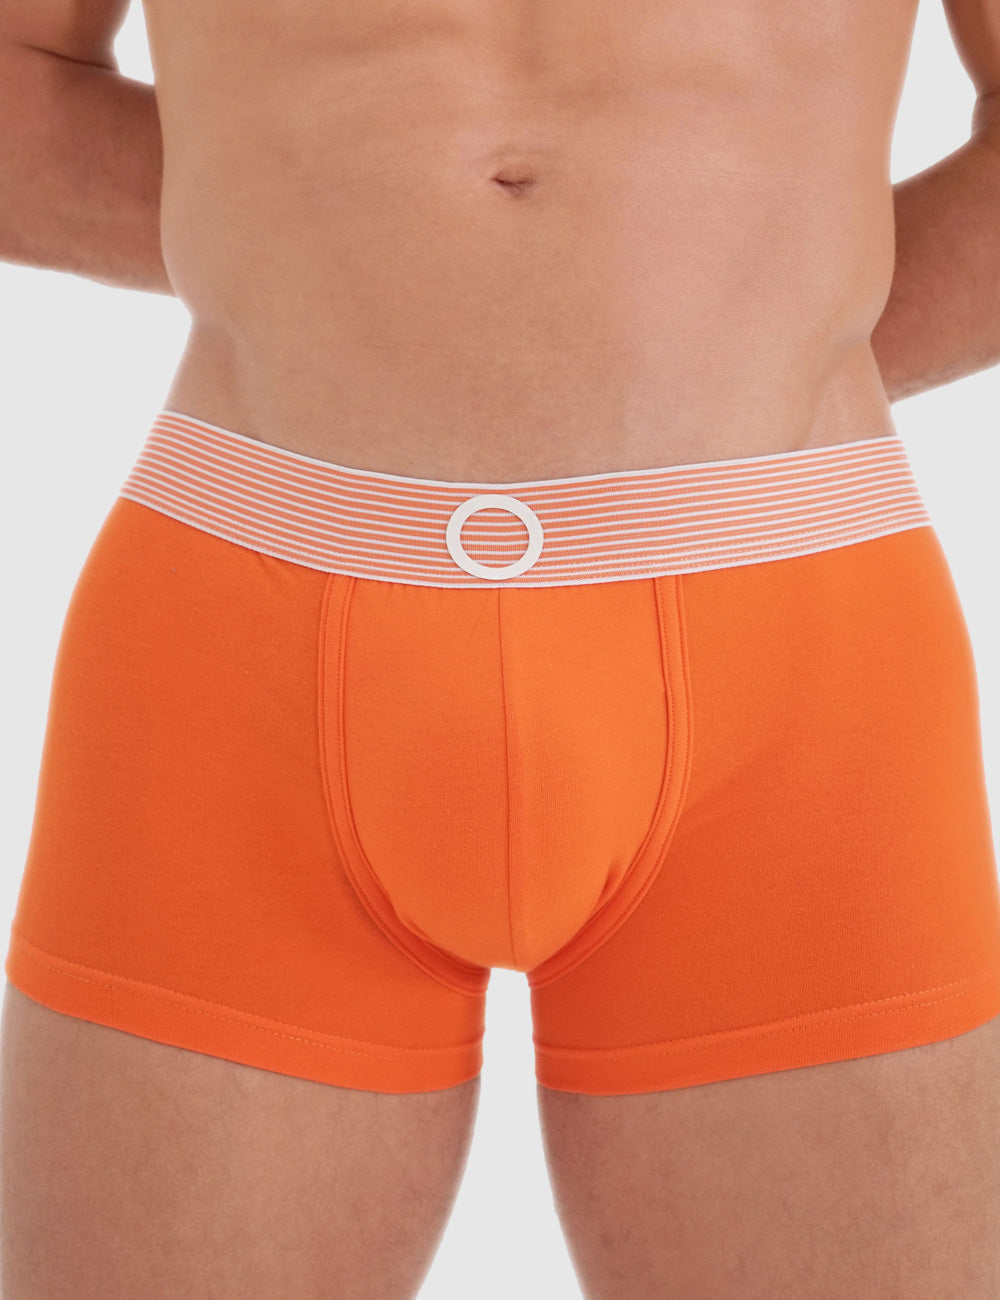 OMAZING Padded Trunk